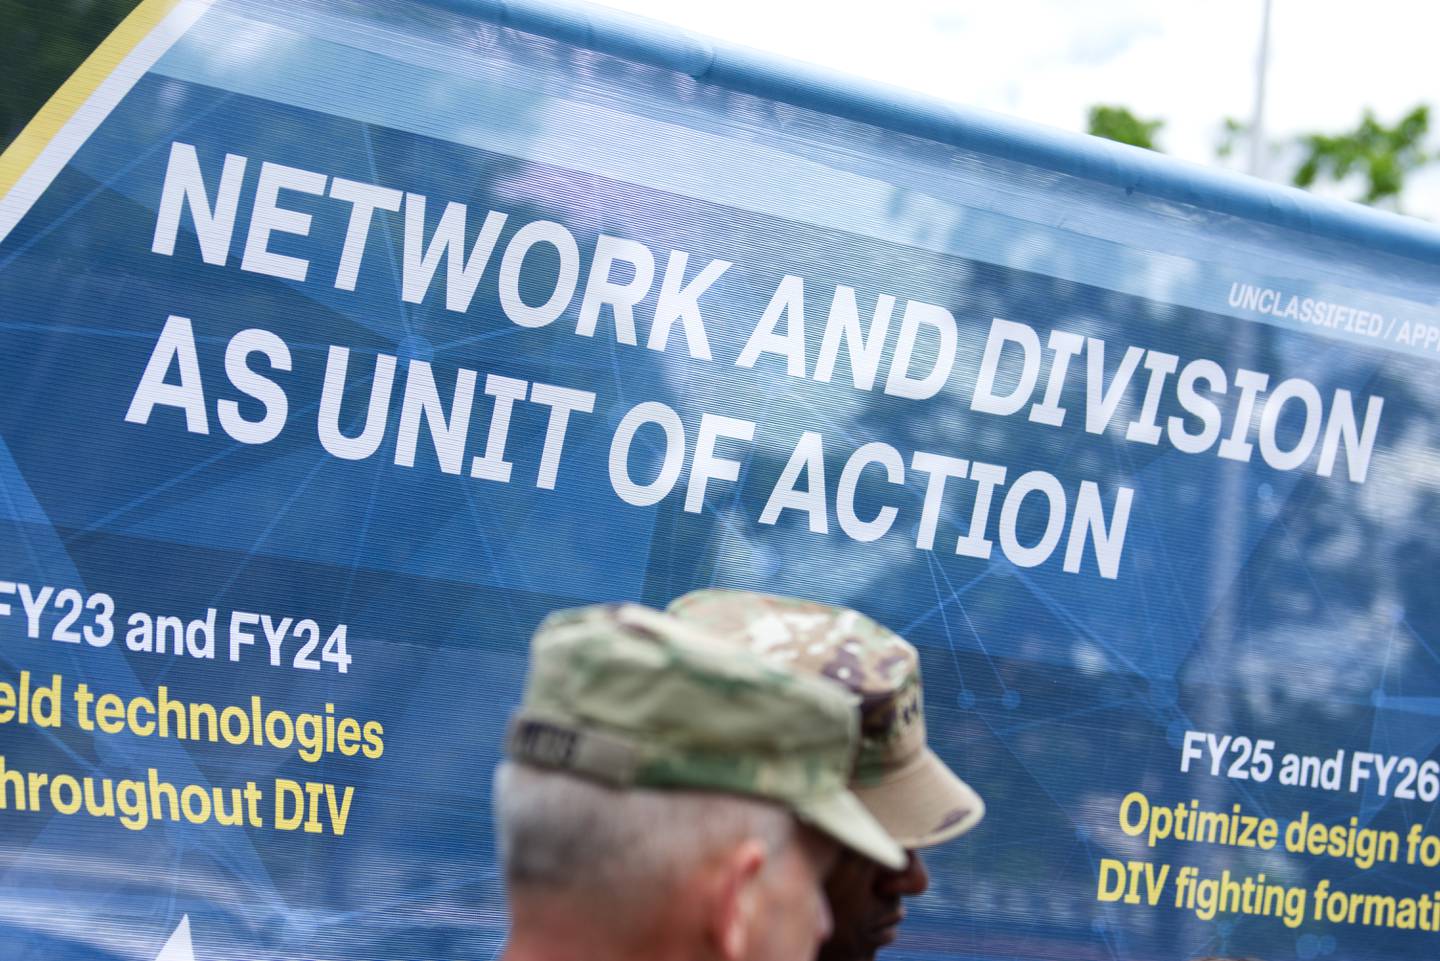 A banner set up for a tech demonstration at Fort Myer, Virginia, in May 2023 reads: "Network and division as unit of action." Two Army generals are seen in the foreground.